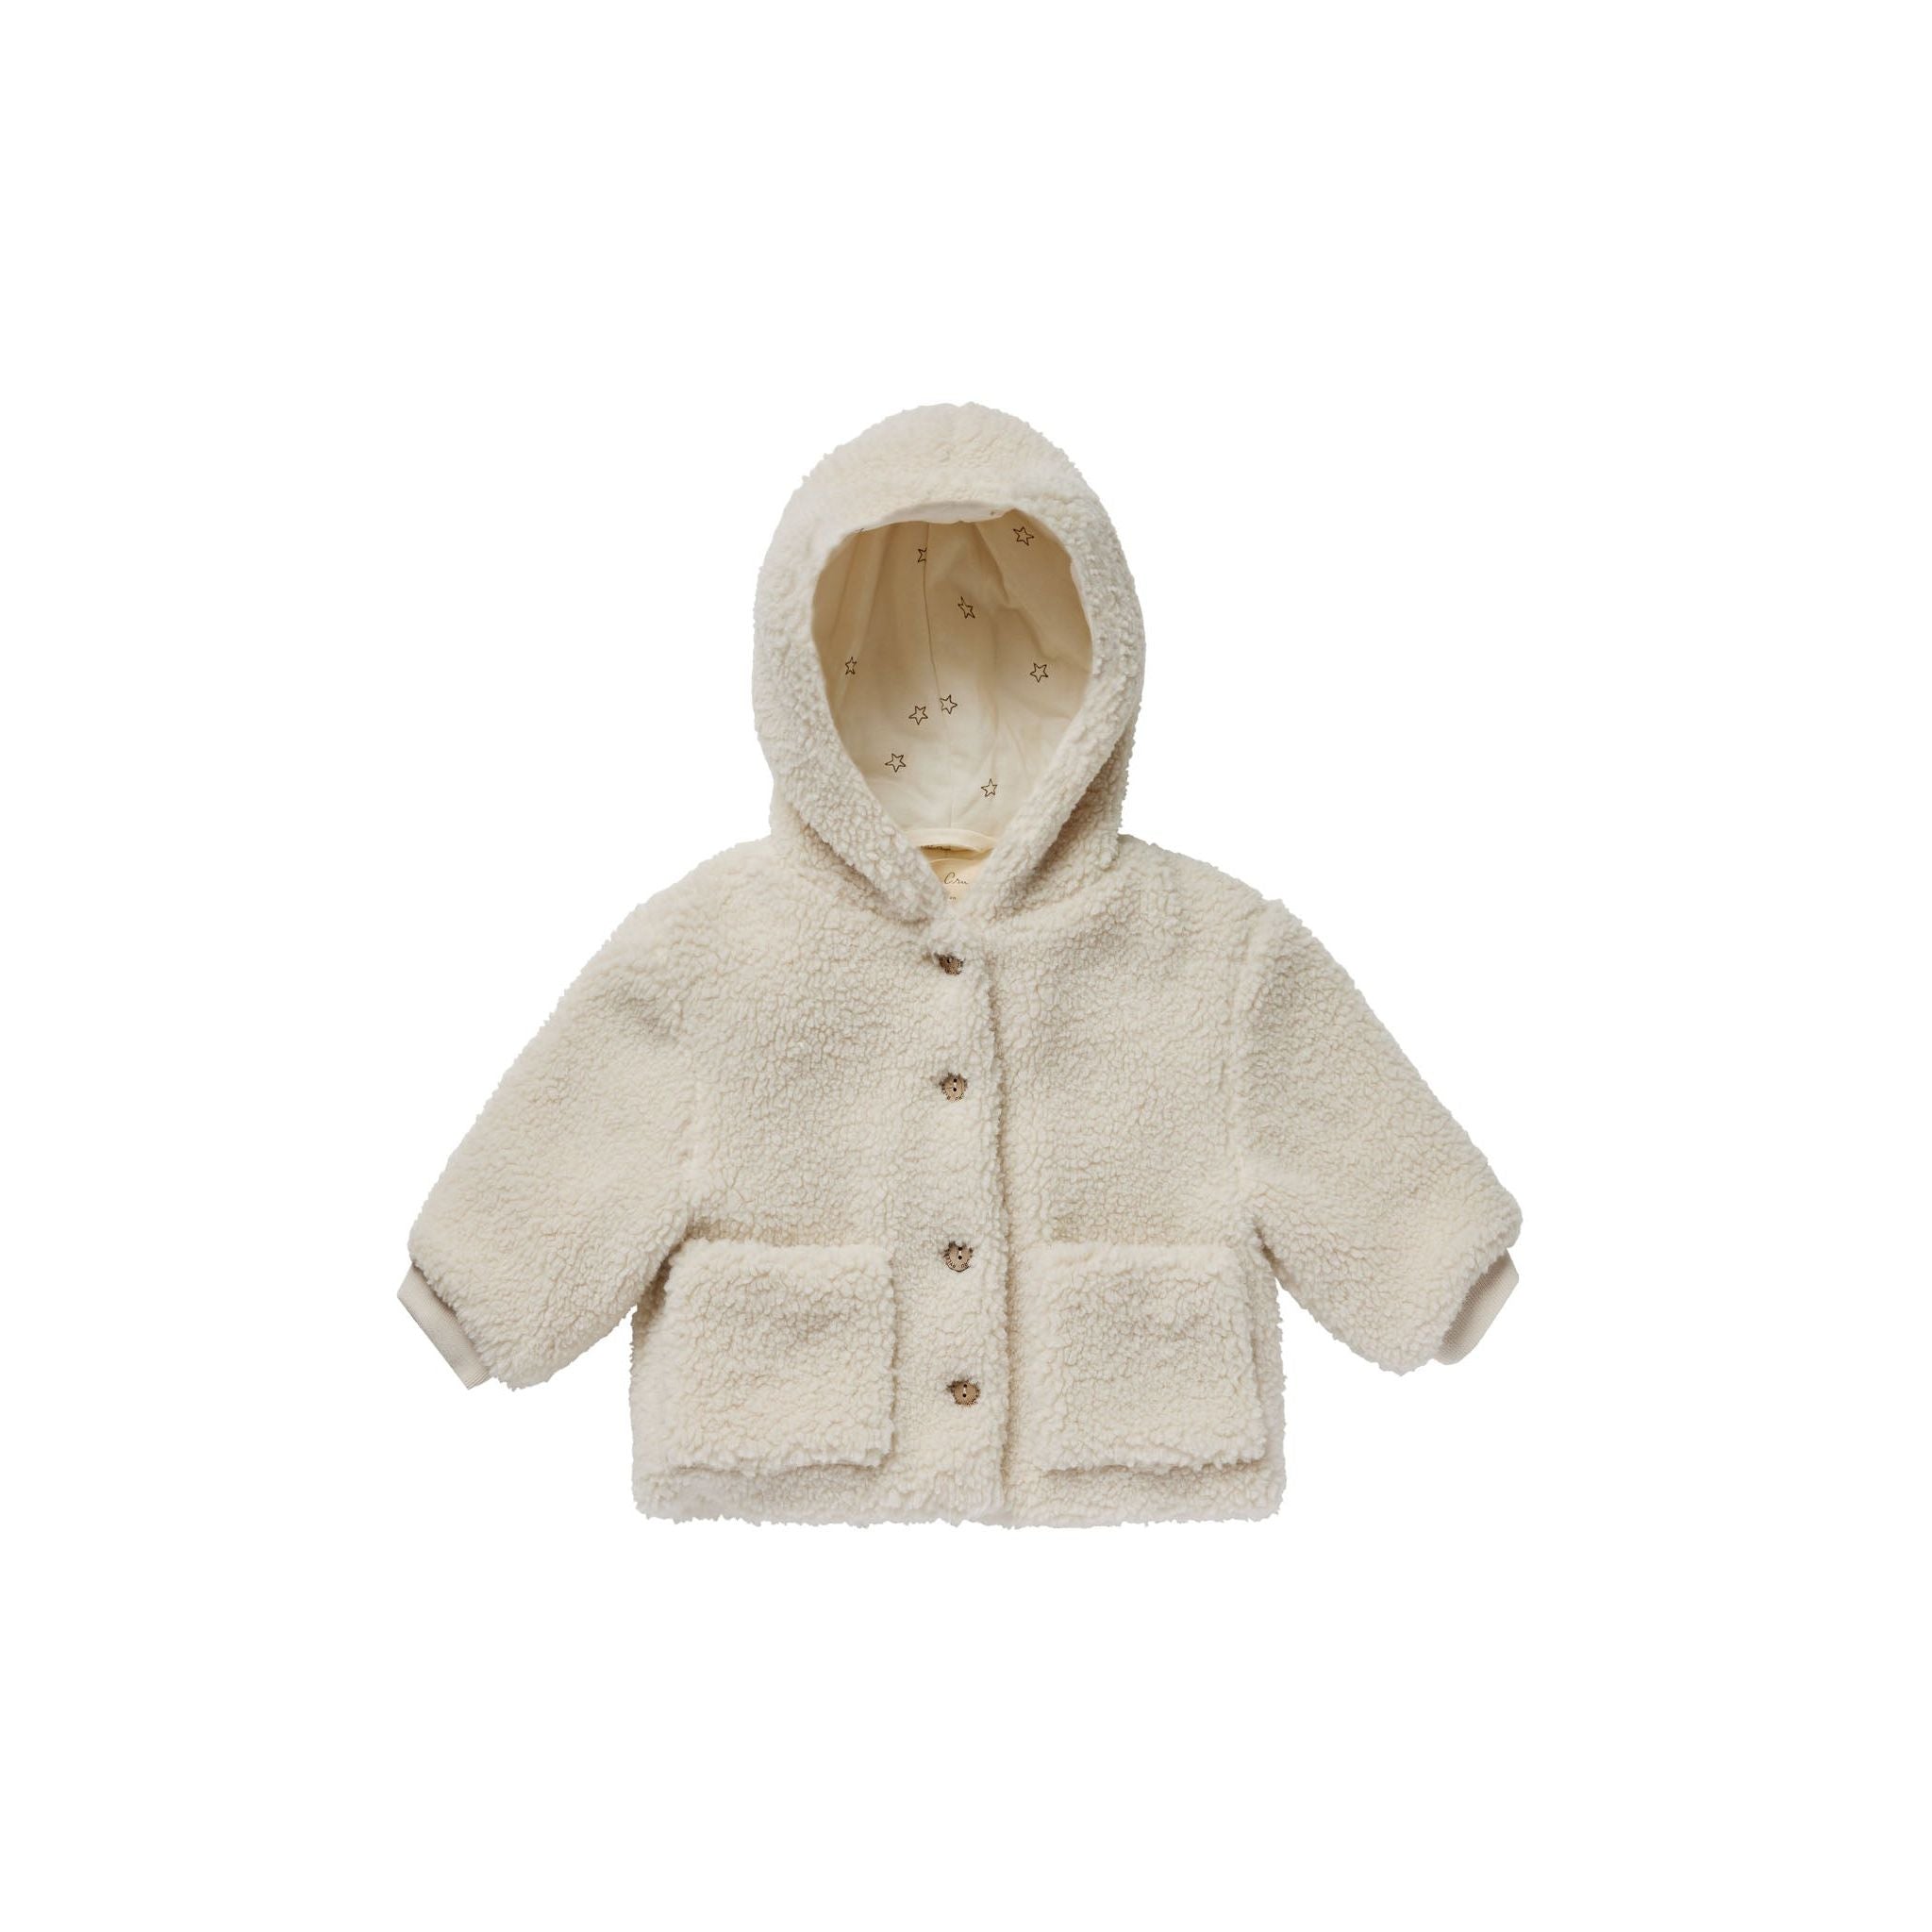 hooded cream colored fleece baby button up coat with pockets 